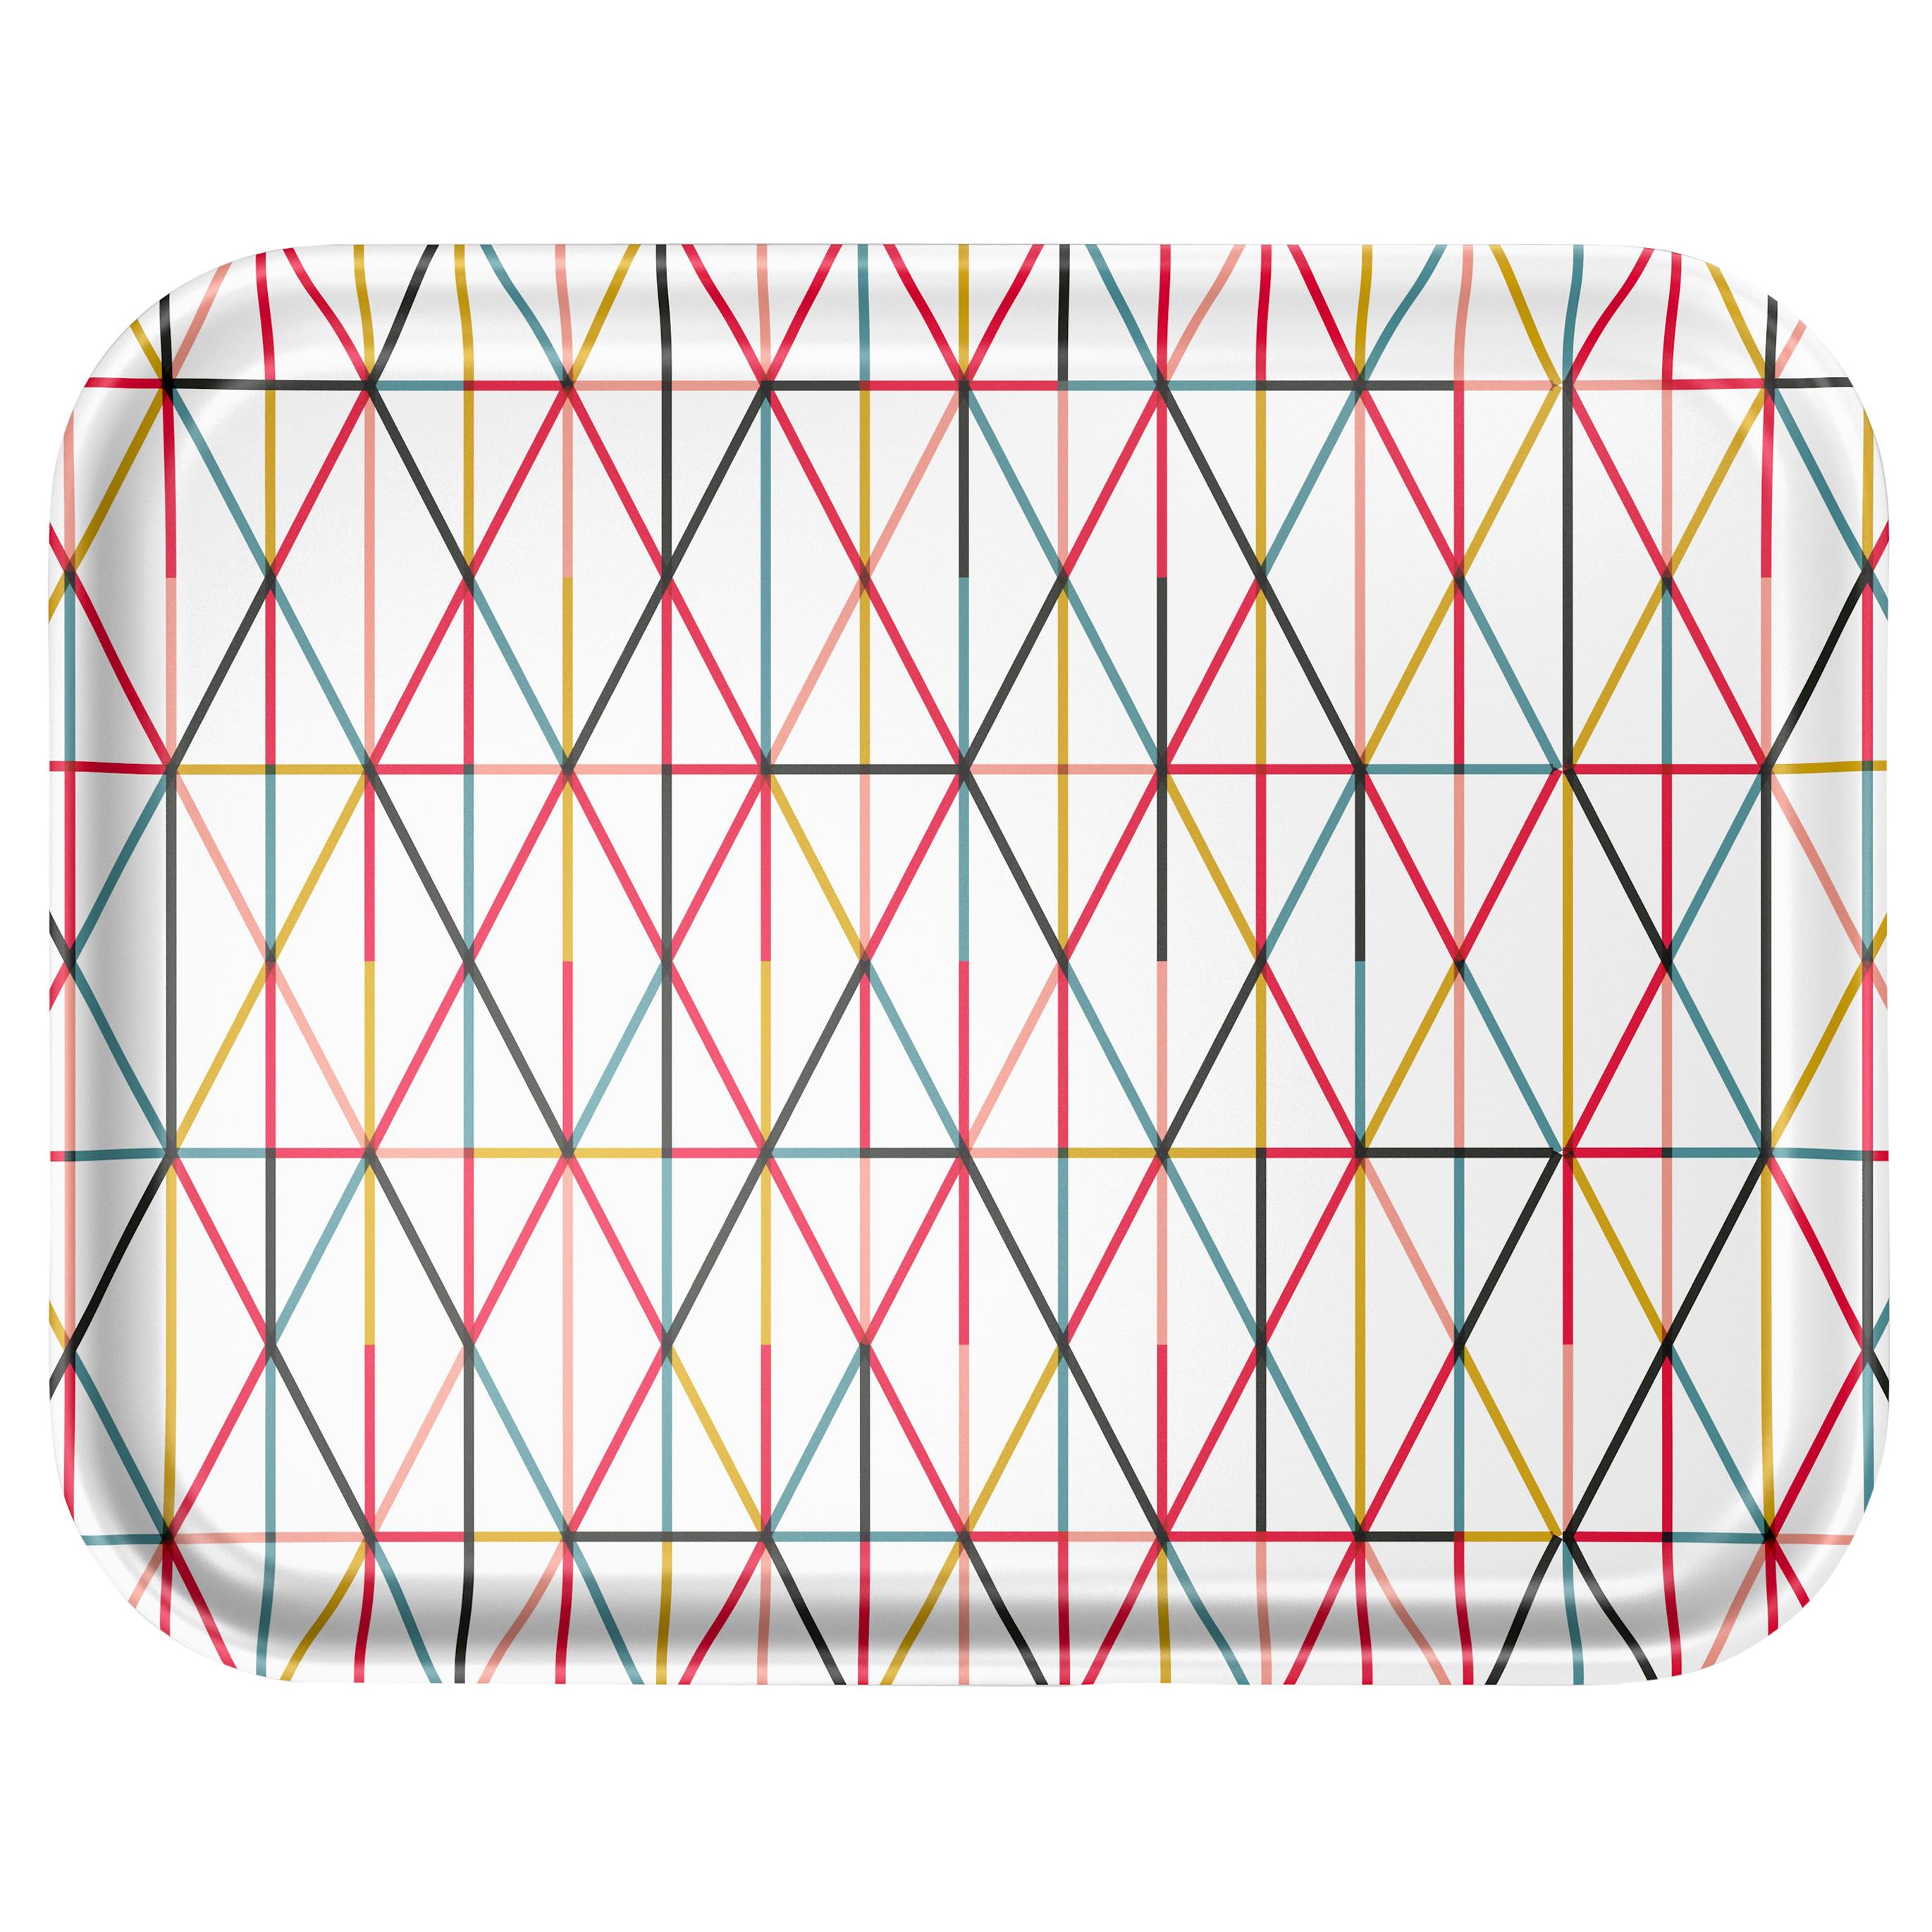 Vitra Large Classic Tray in Multicolor Grid Pattern by Alexander Girard For Sale